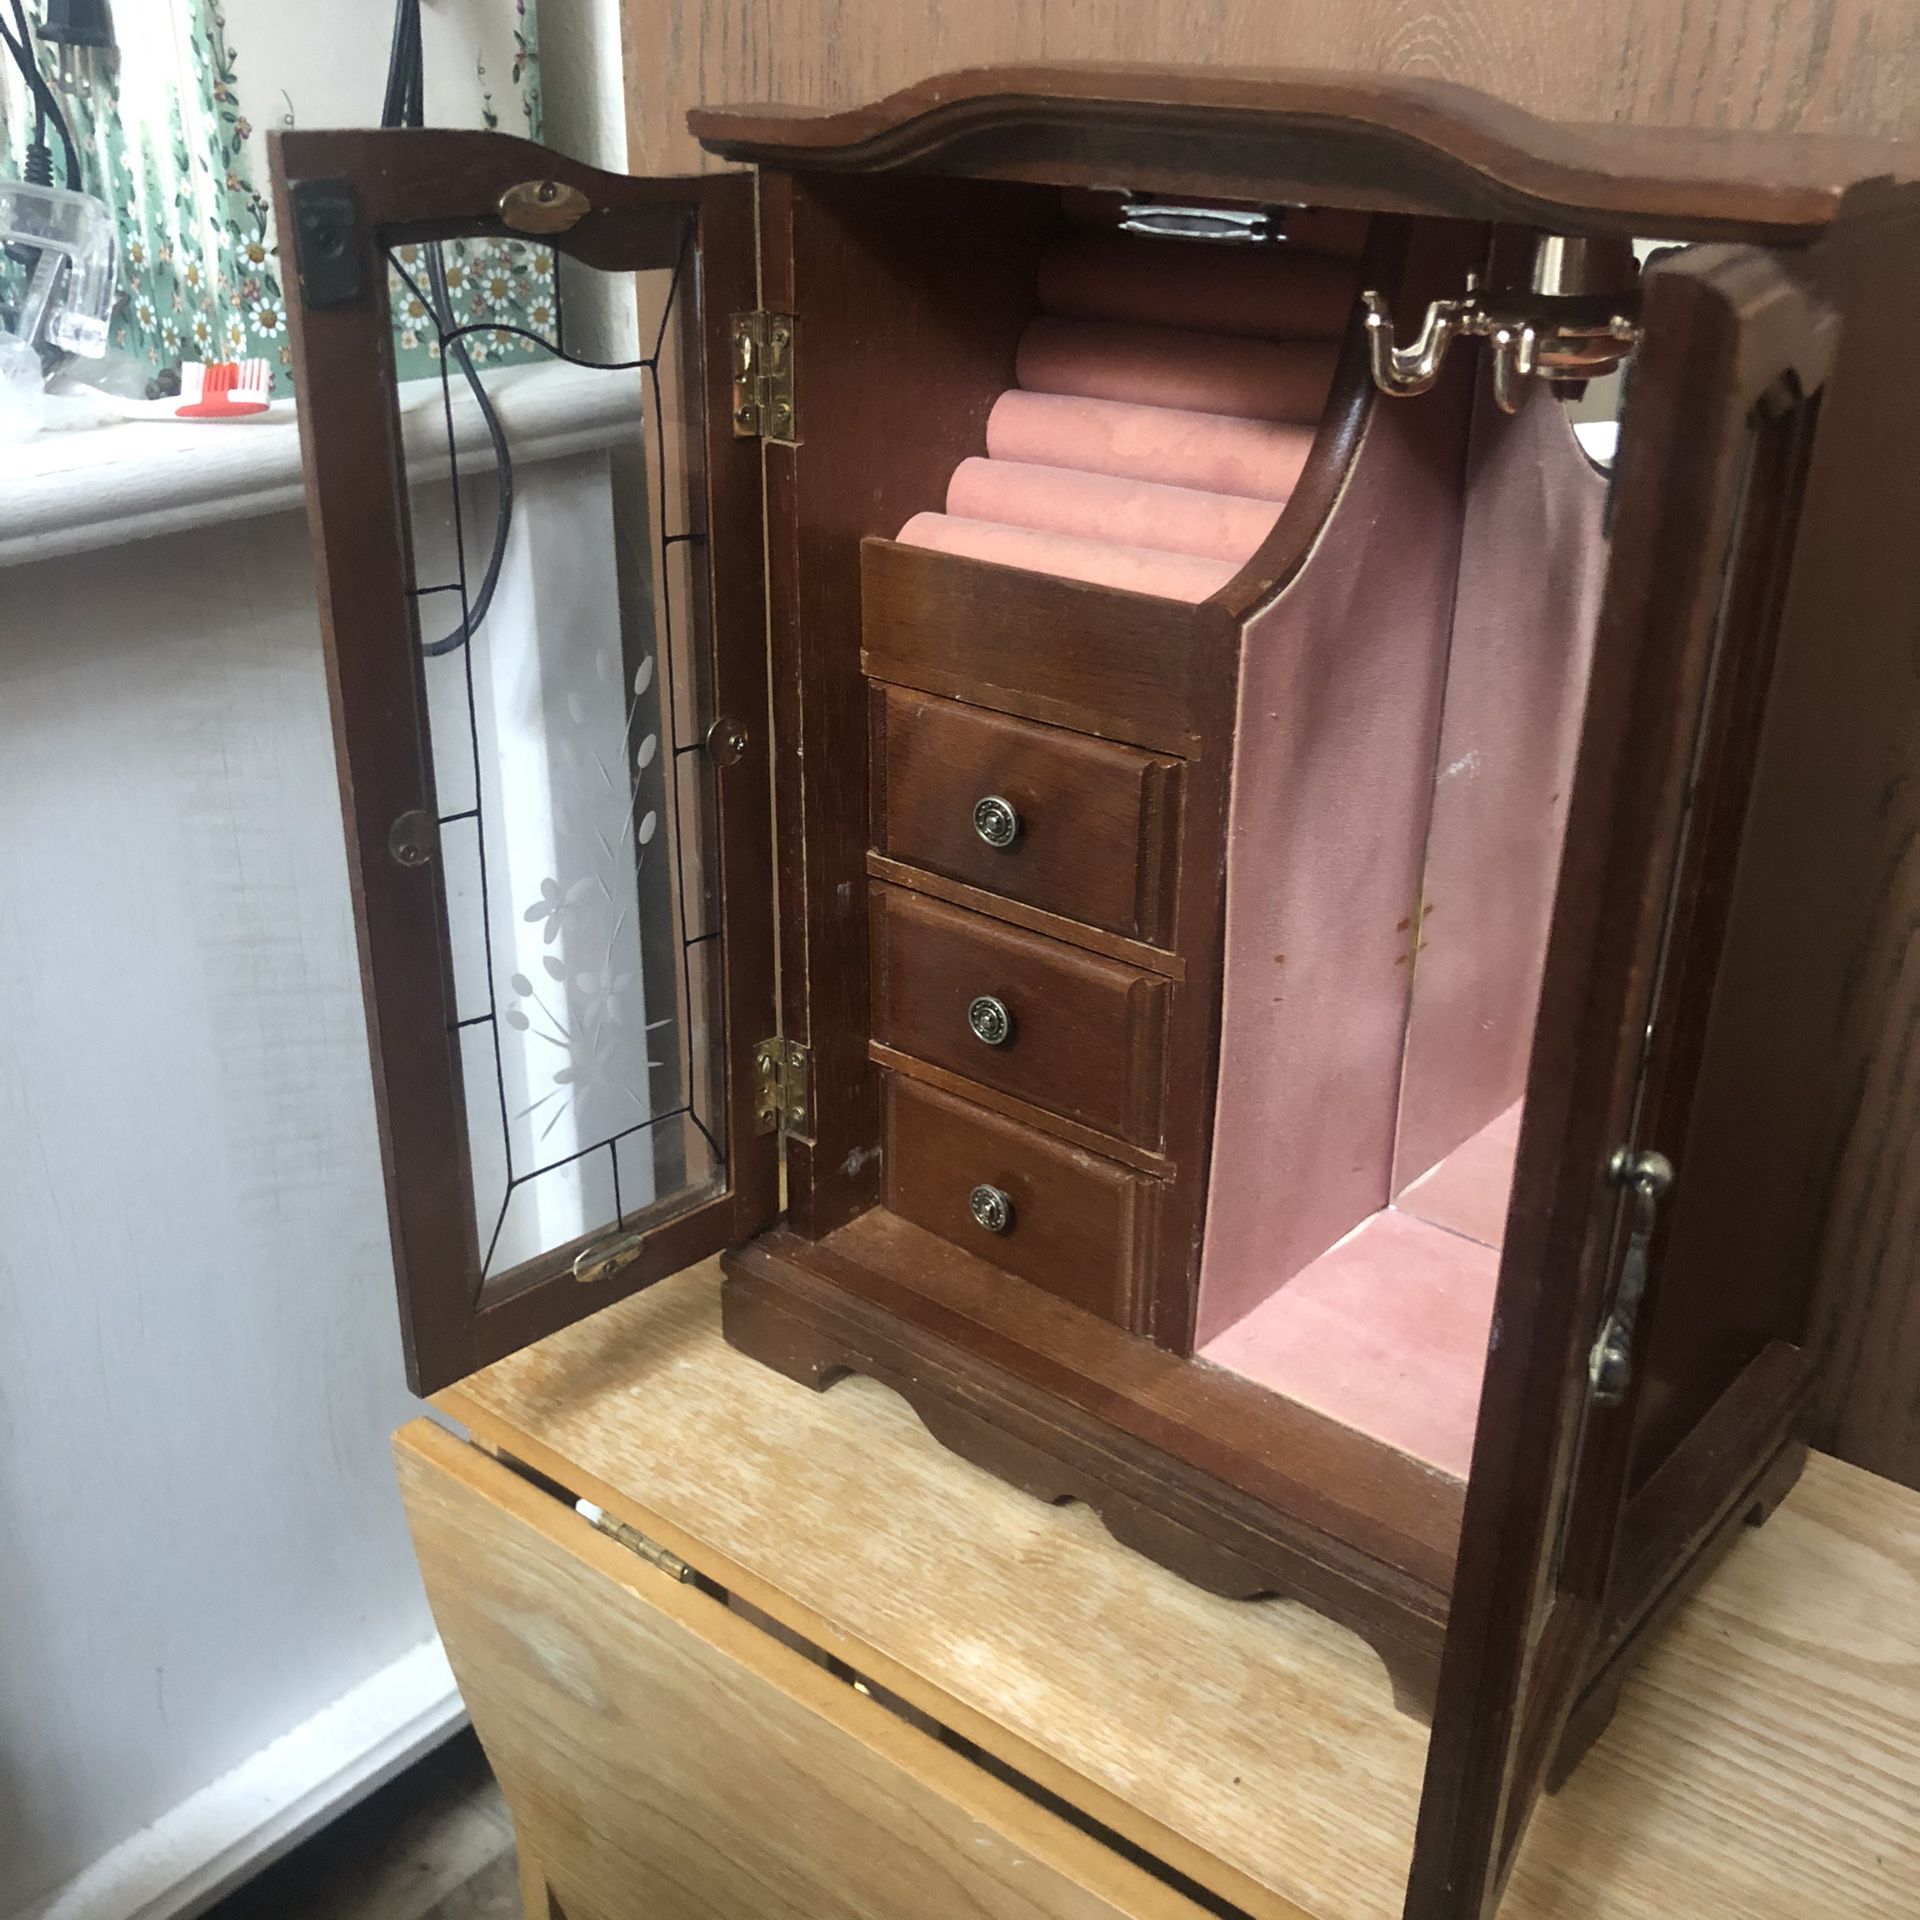 Vintage jewelry armoire with a music box